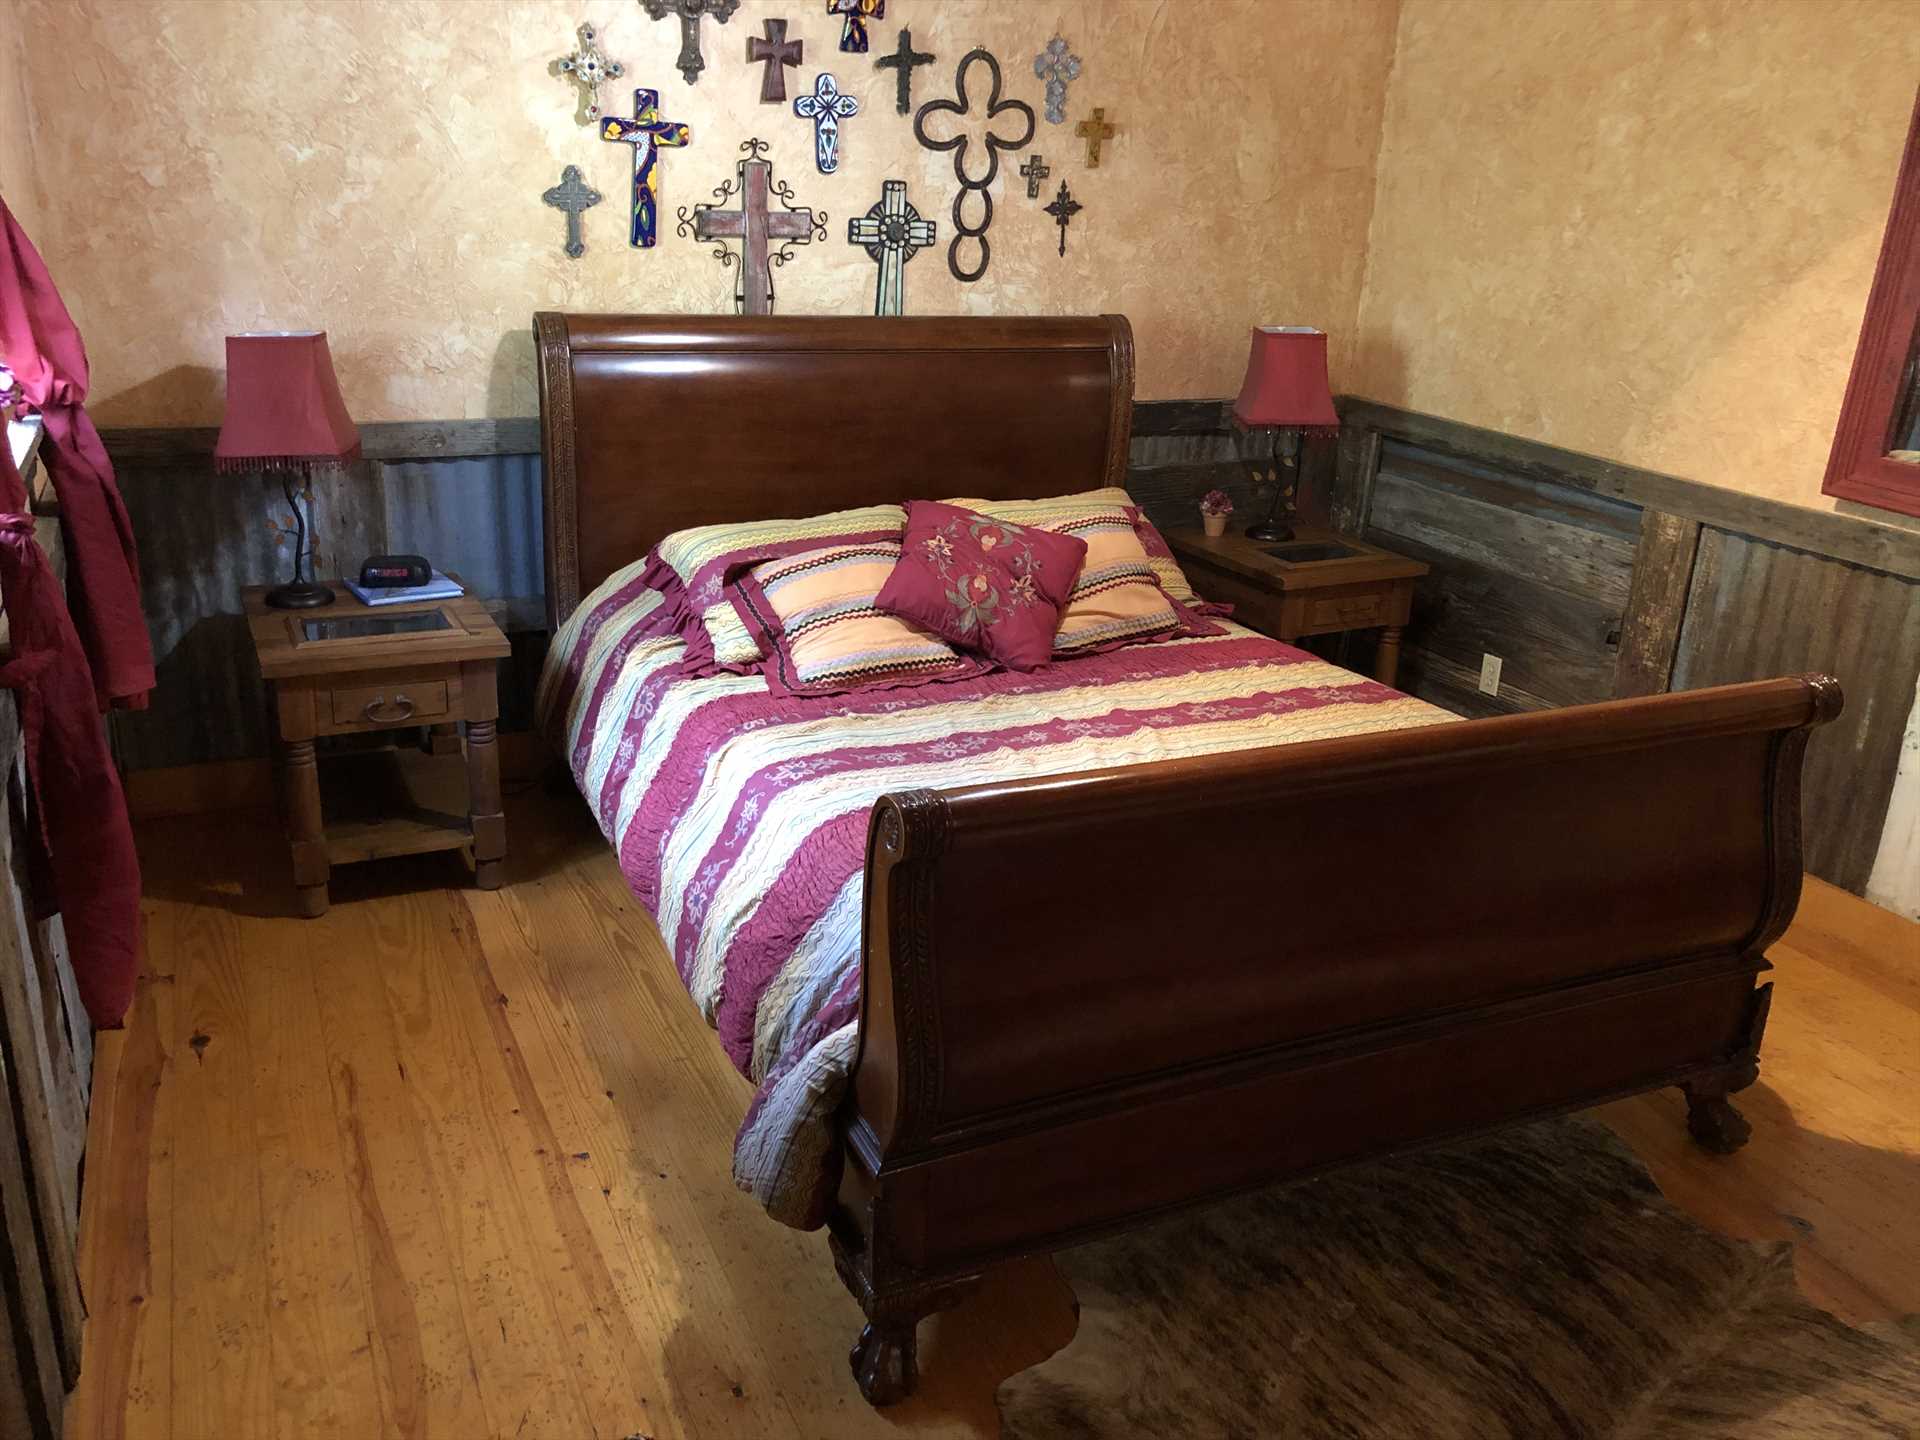                                                 The master bedroom's queen-sized sleigh bed is like sinking into a cloud!